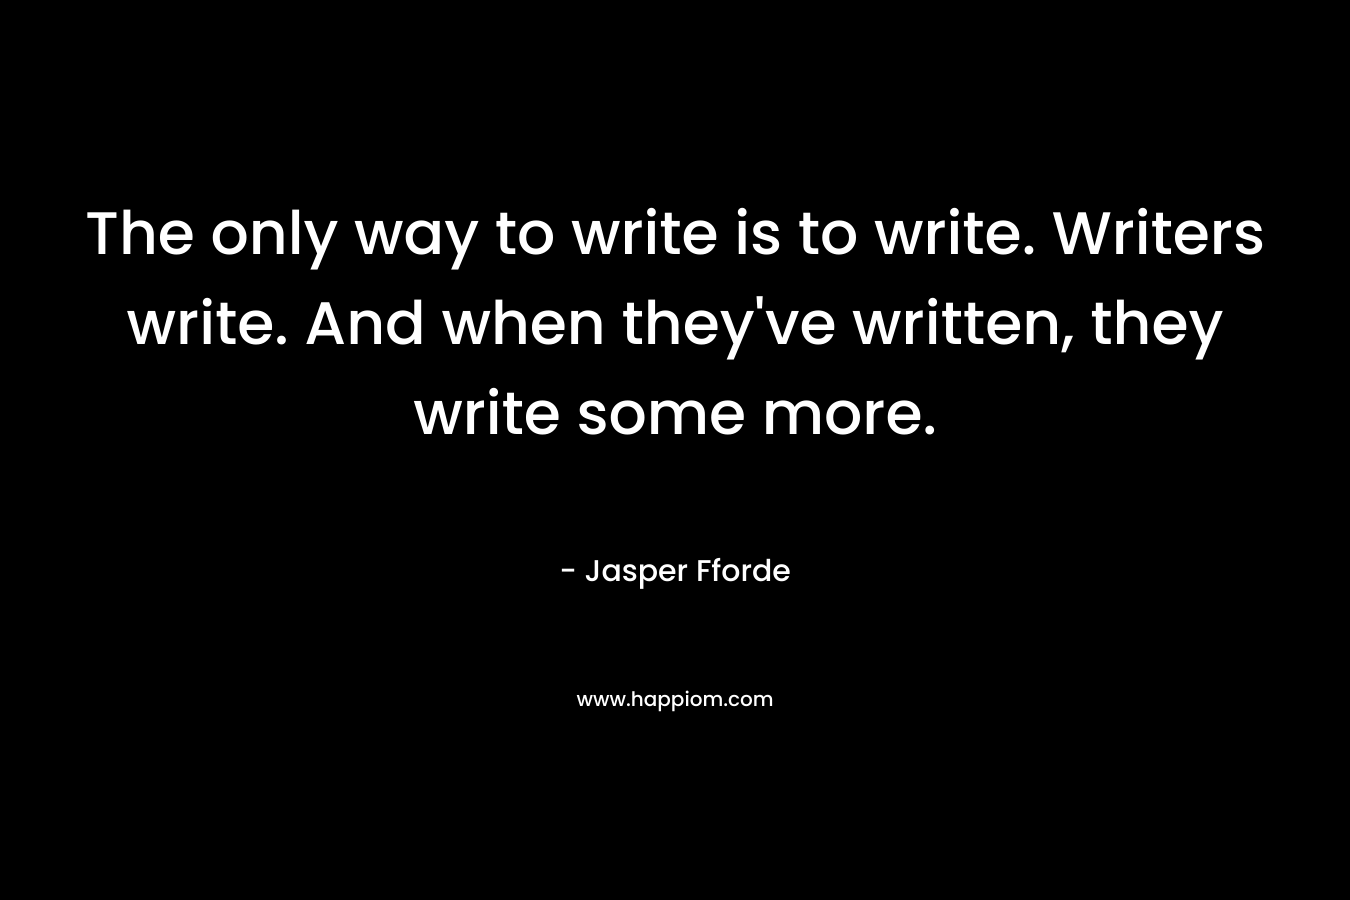 The only way to write is to write. Writers write. And when they've written, they write some more.